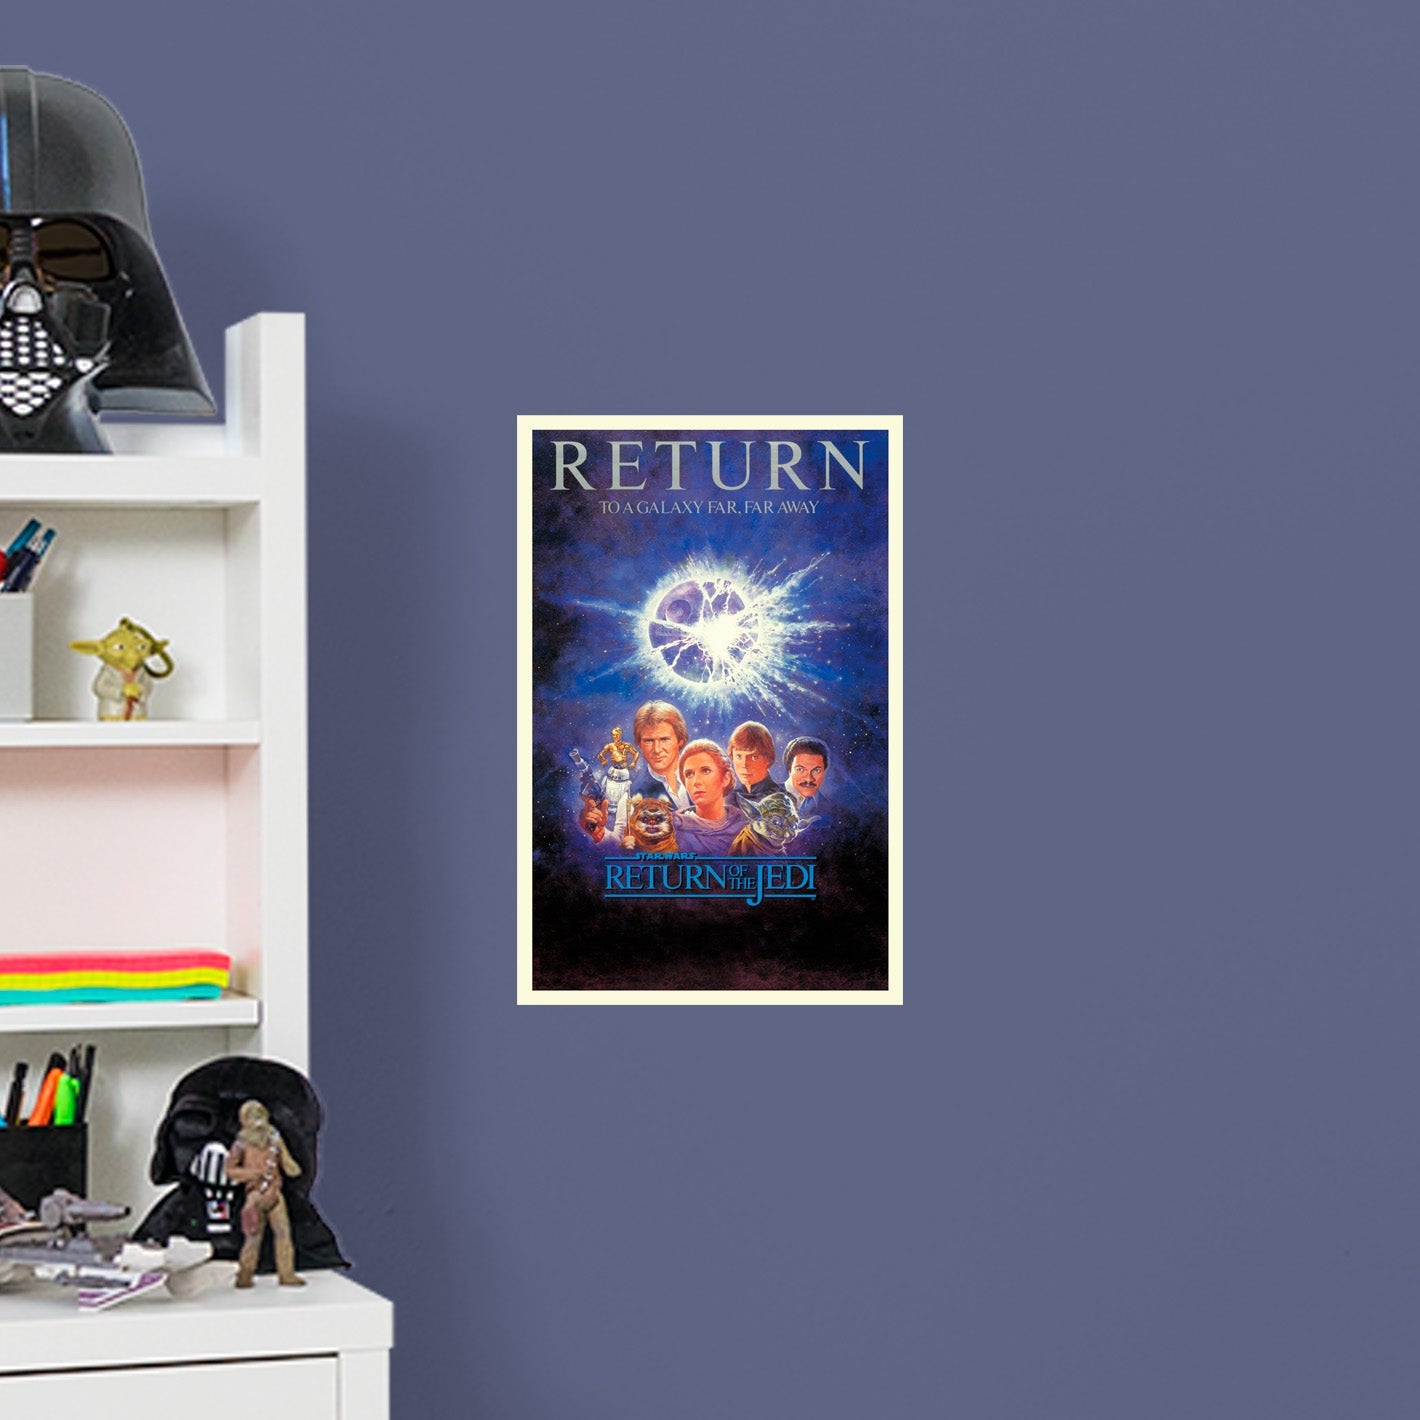 Return of the Jedi 40th: RETURN Movie Poster - Officially Licensed Star Wars Removable Adhesive Decal